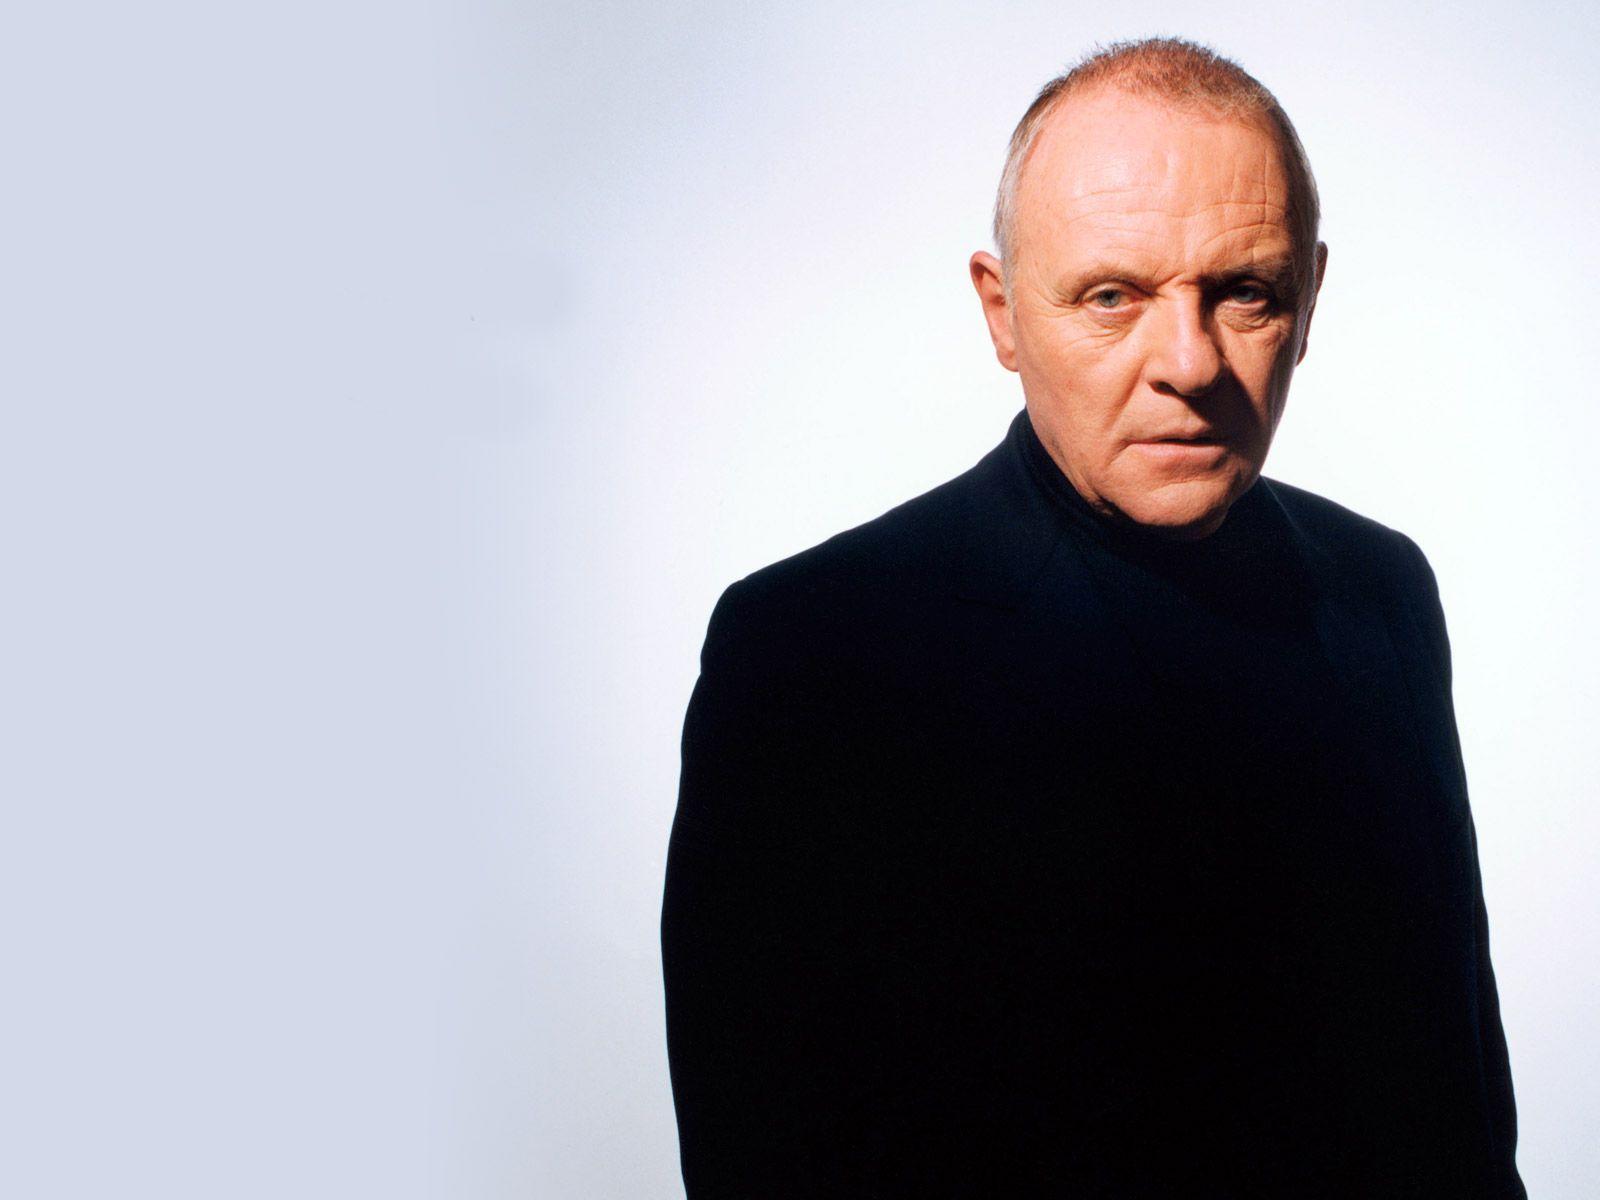 Anthony Hopkins Computer Wallpaper 58670 1600x1200 px